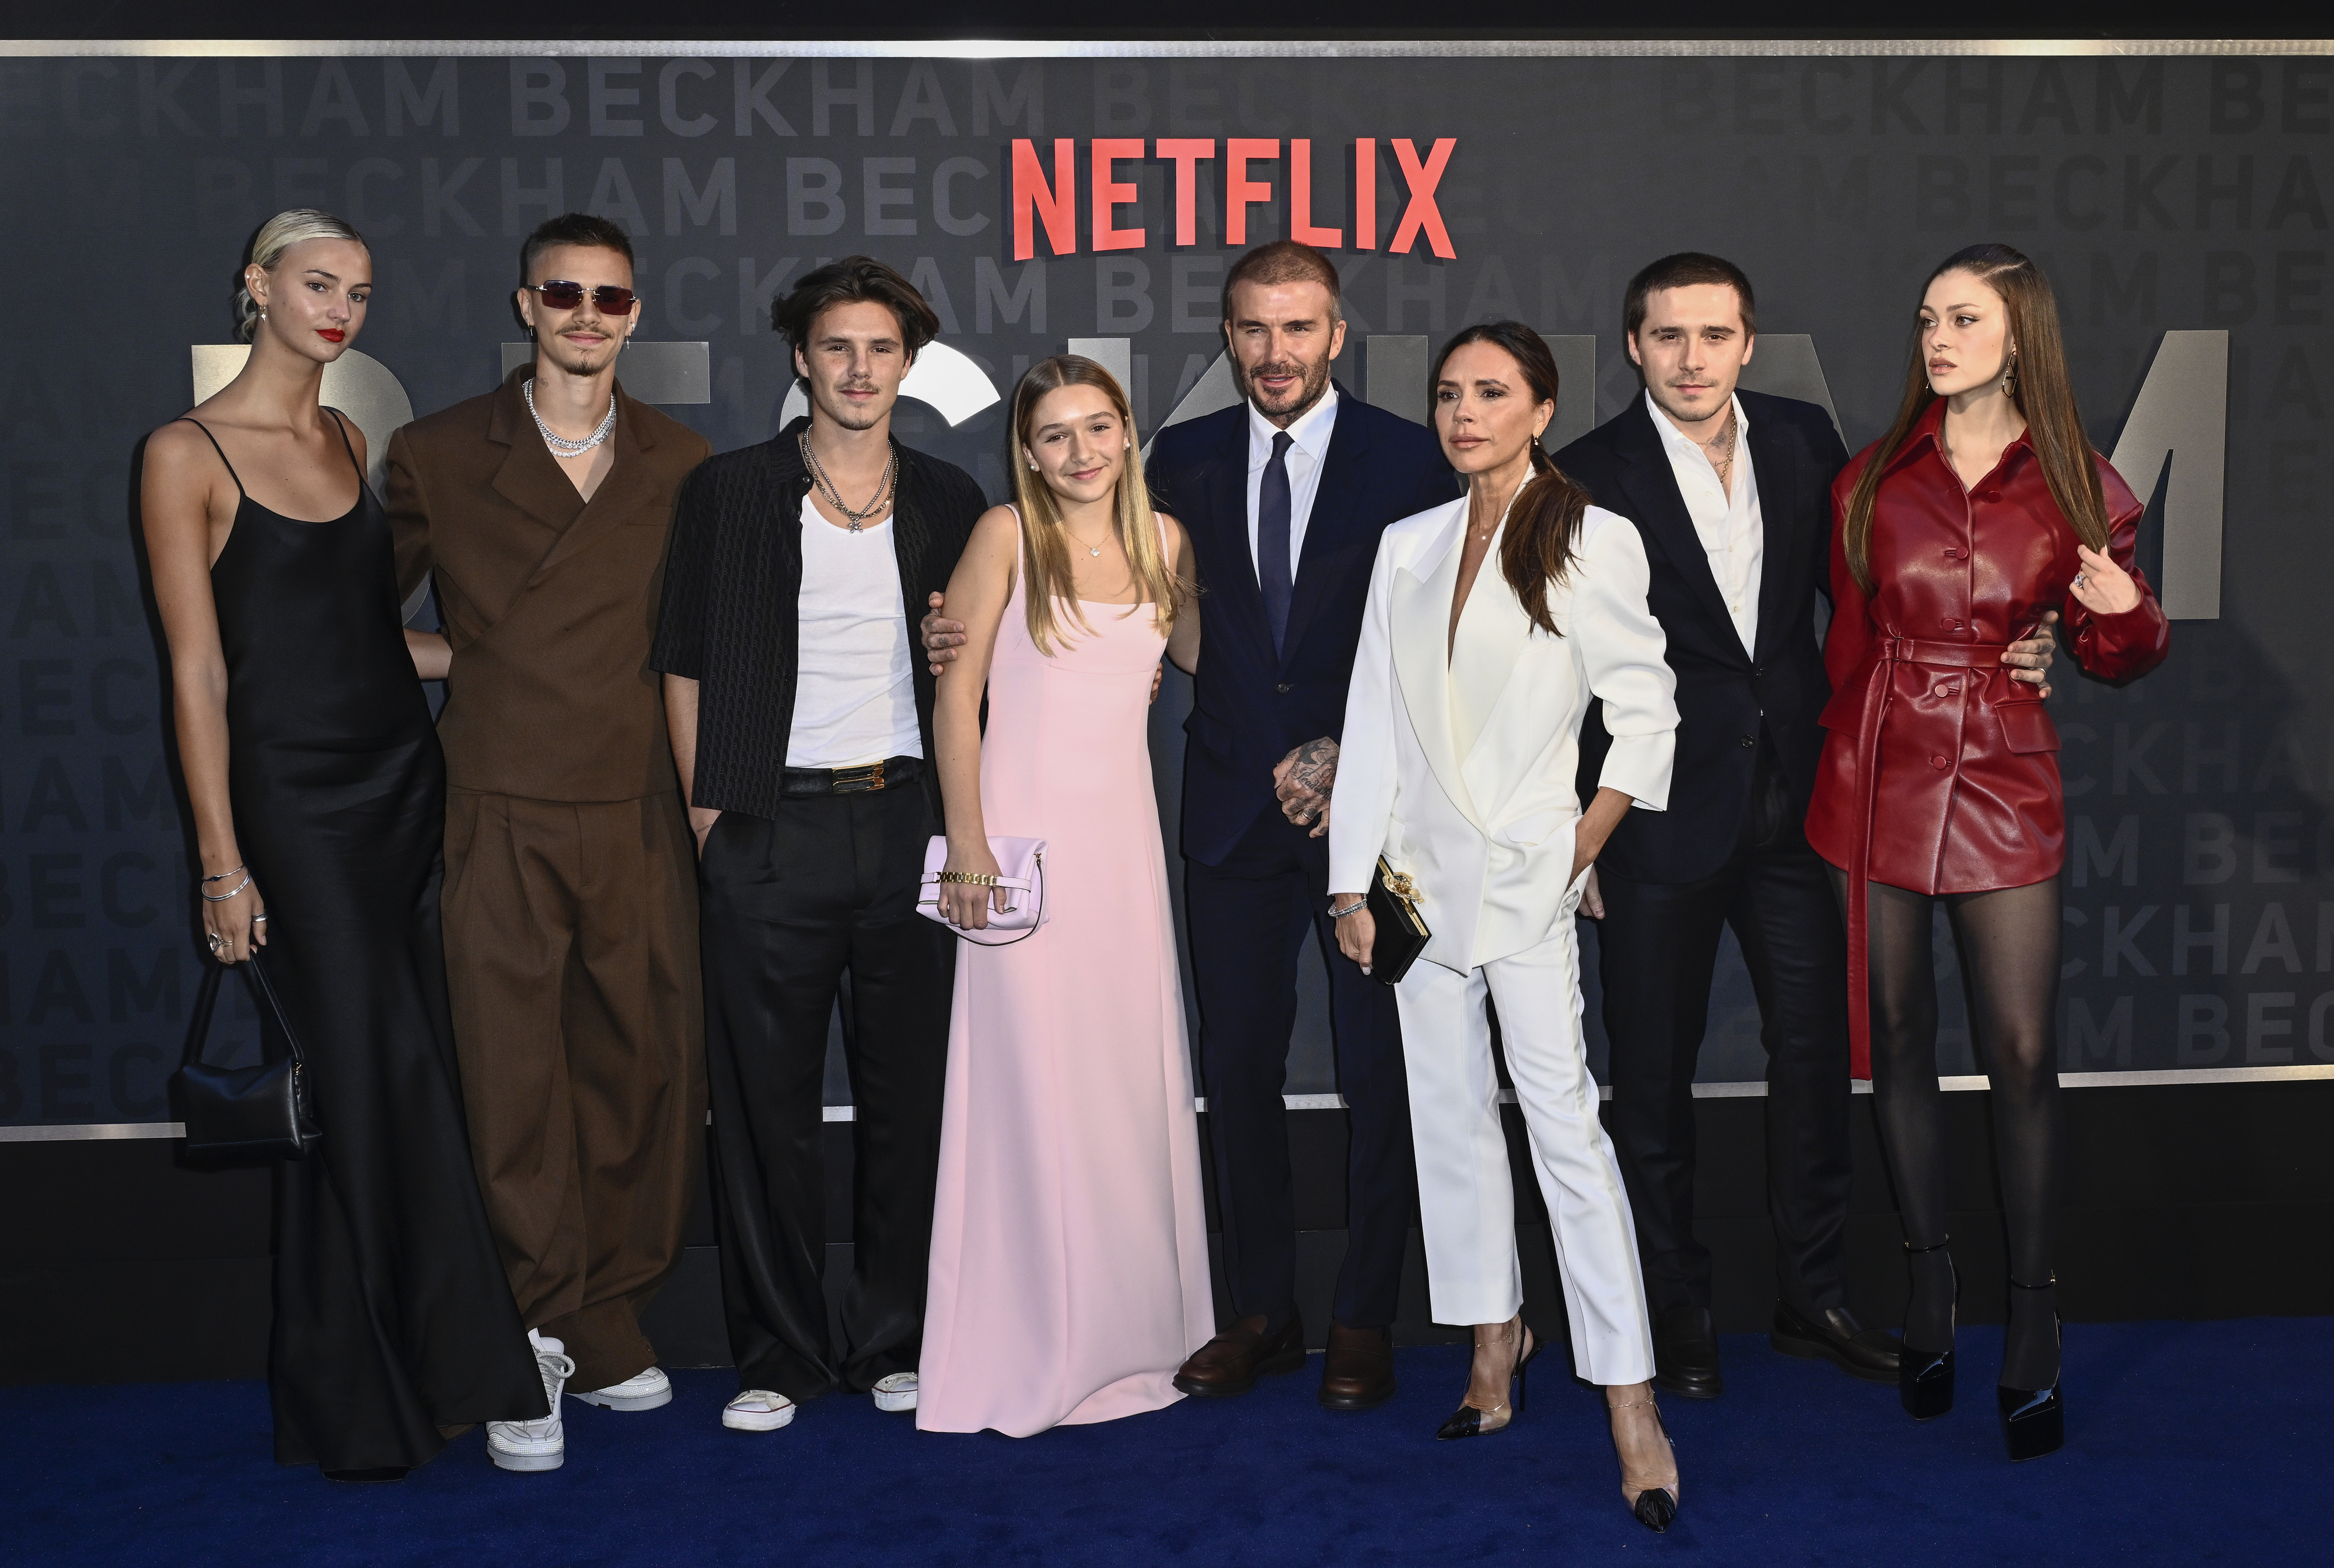 The Beckham family at the Netflix event